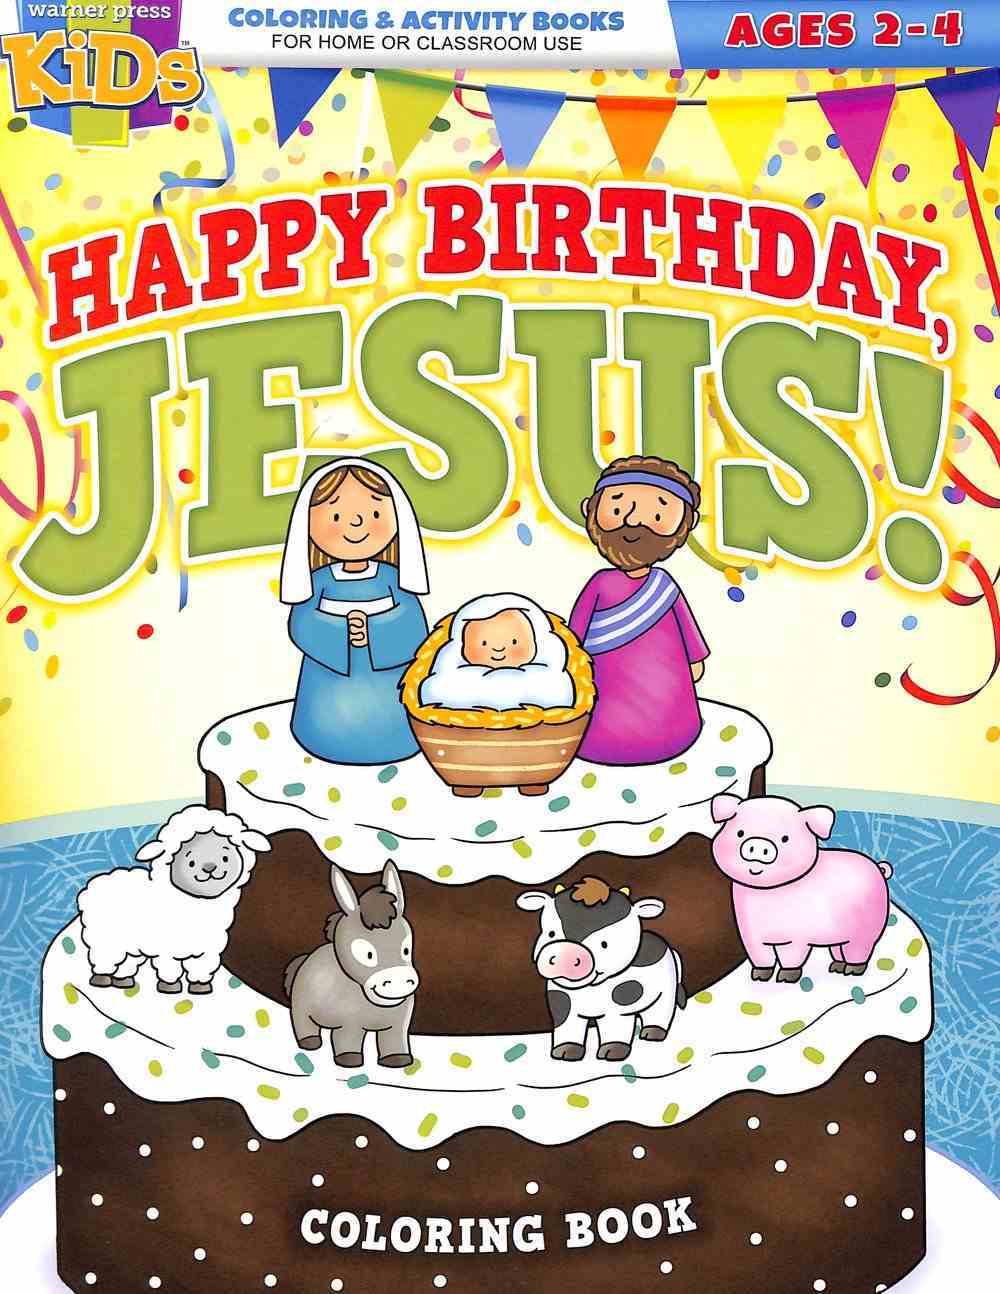 Happy Birthday, Jesus (Ages 2-4, Reproducible) (Coloring Book) (Warner Press Colouring & Activity Books Series) Paperback